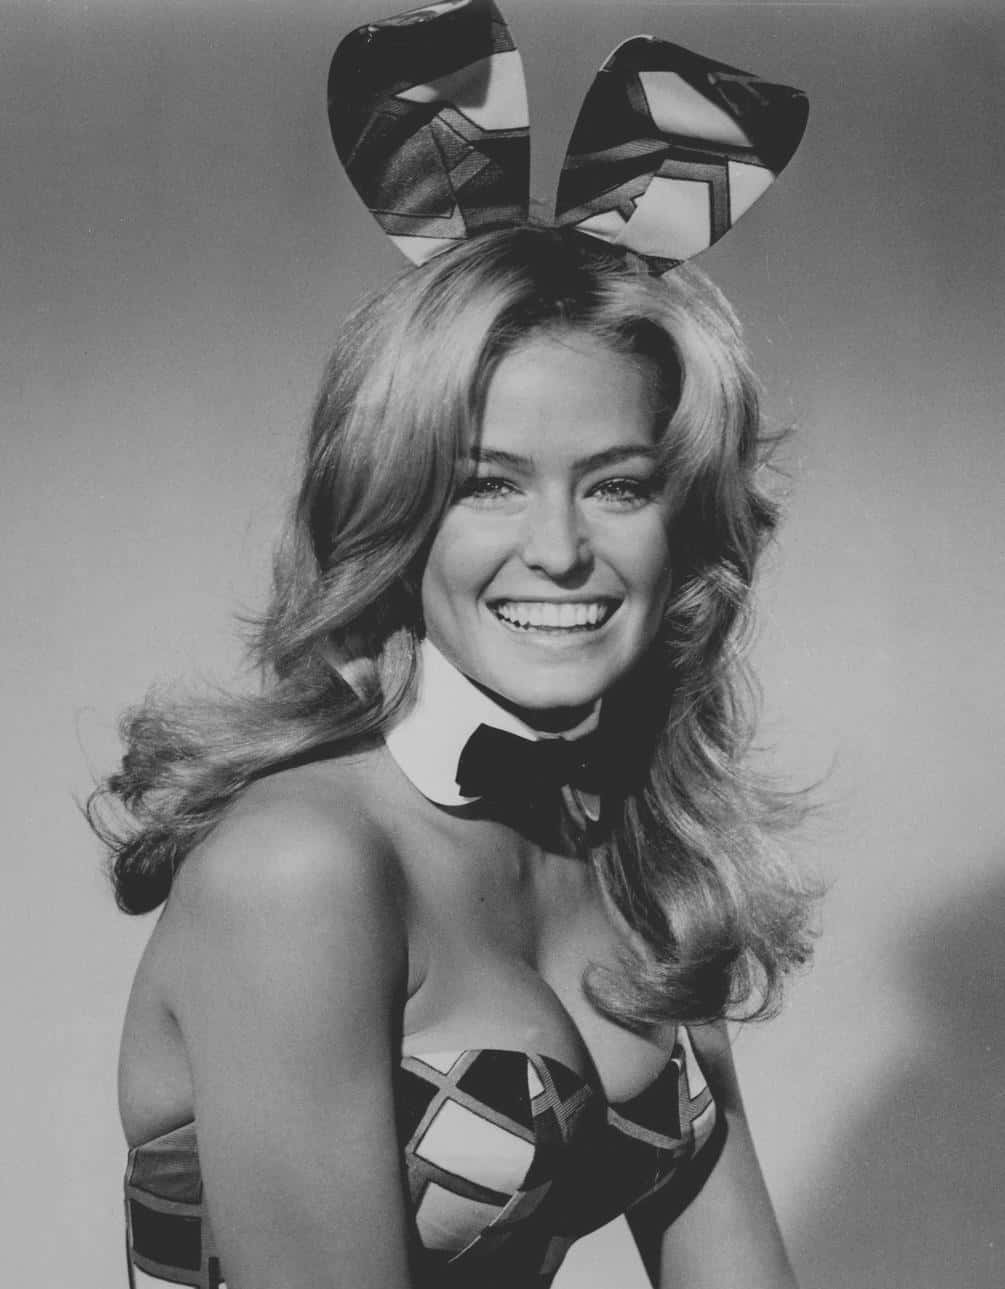 A Woman In A Bunny Costume Smiling